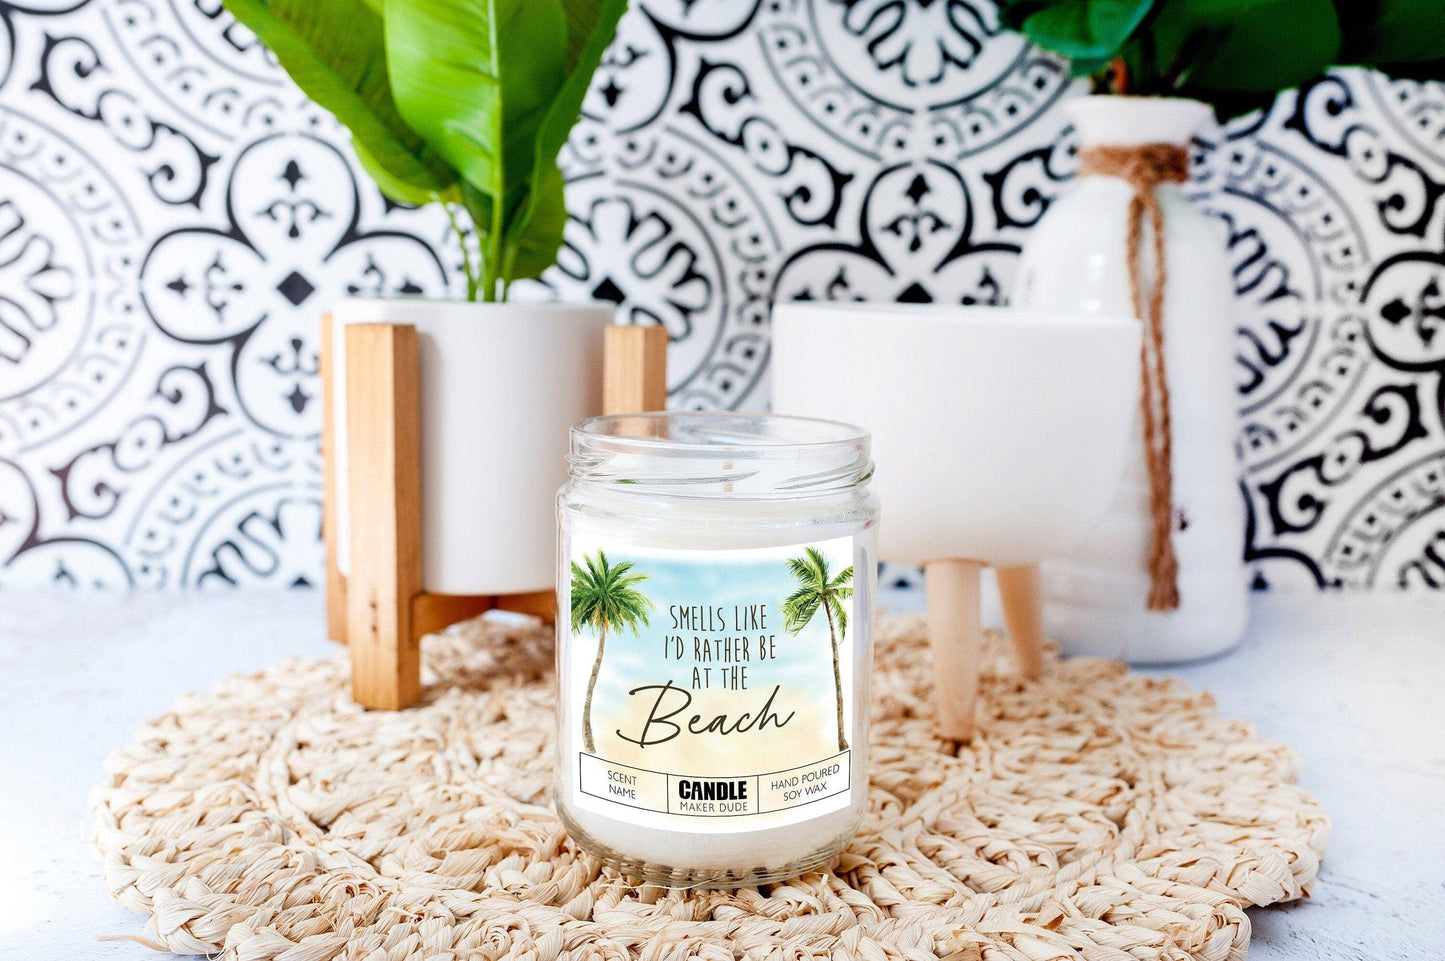 Smells Like I'd Rather Be At The Beach Funny Gift Ideas Candles, Palm Tree Tropical Beach House Decor